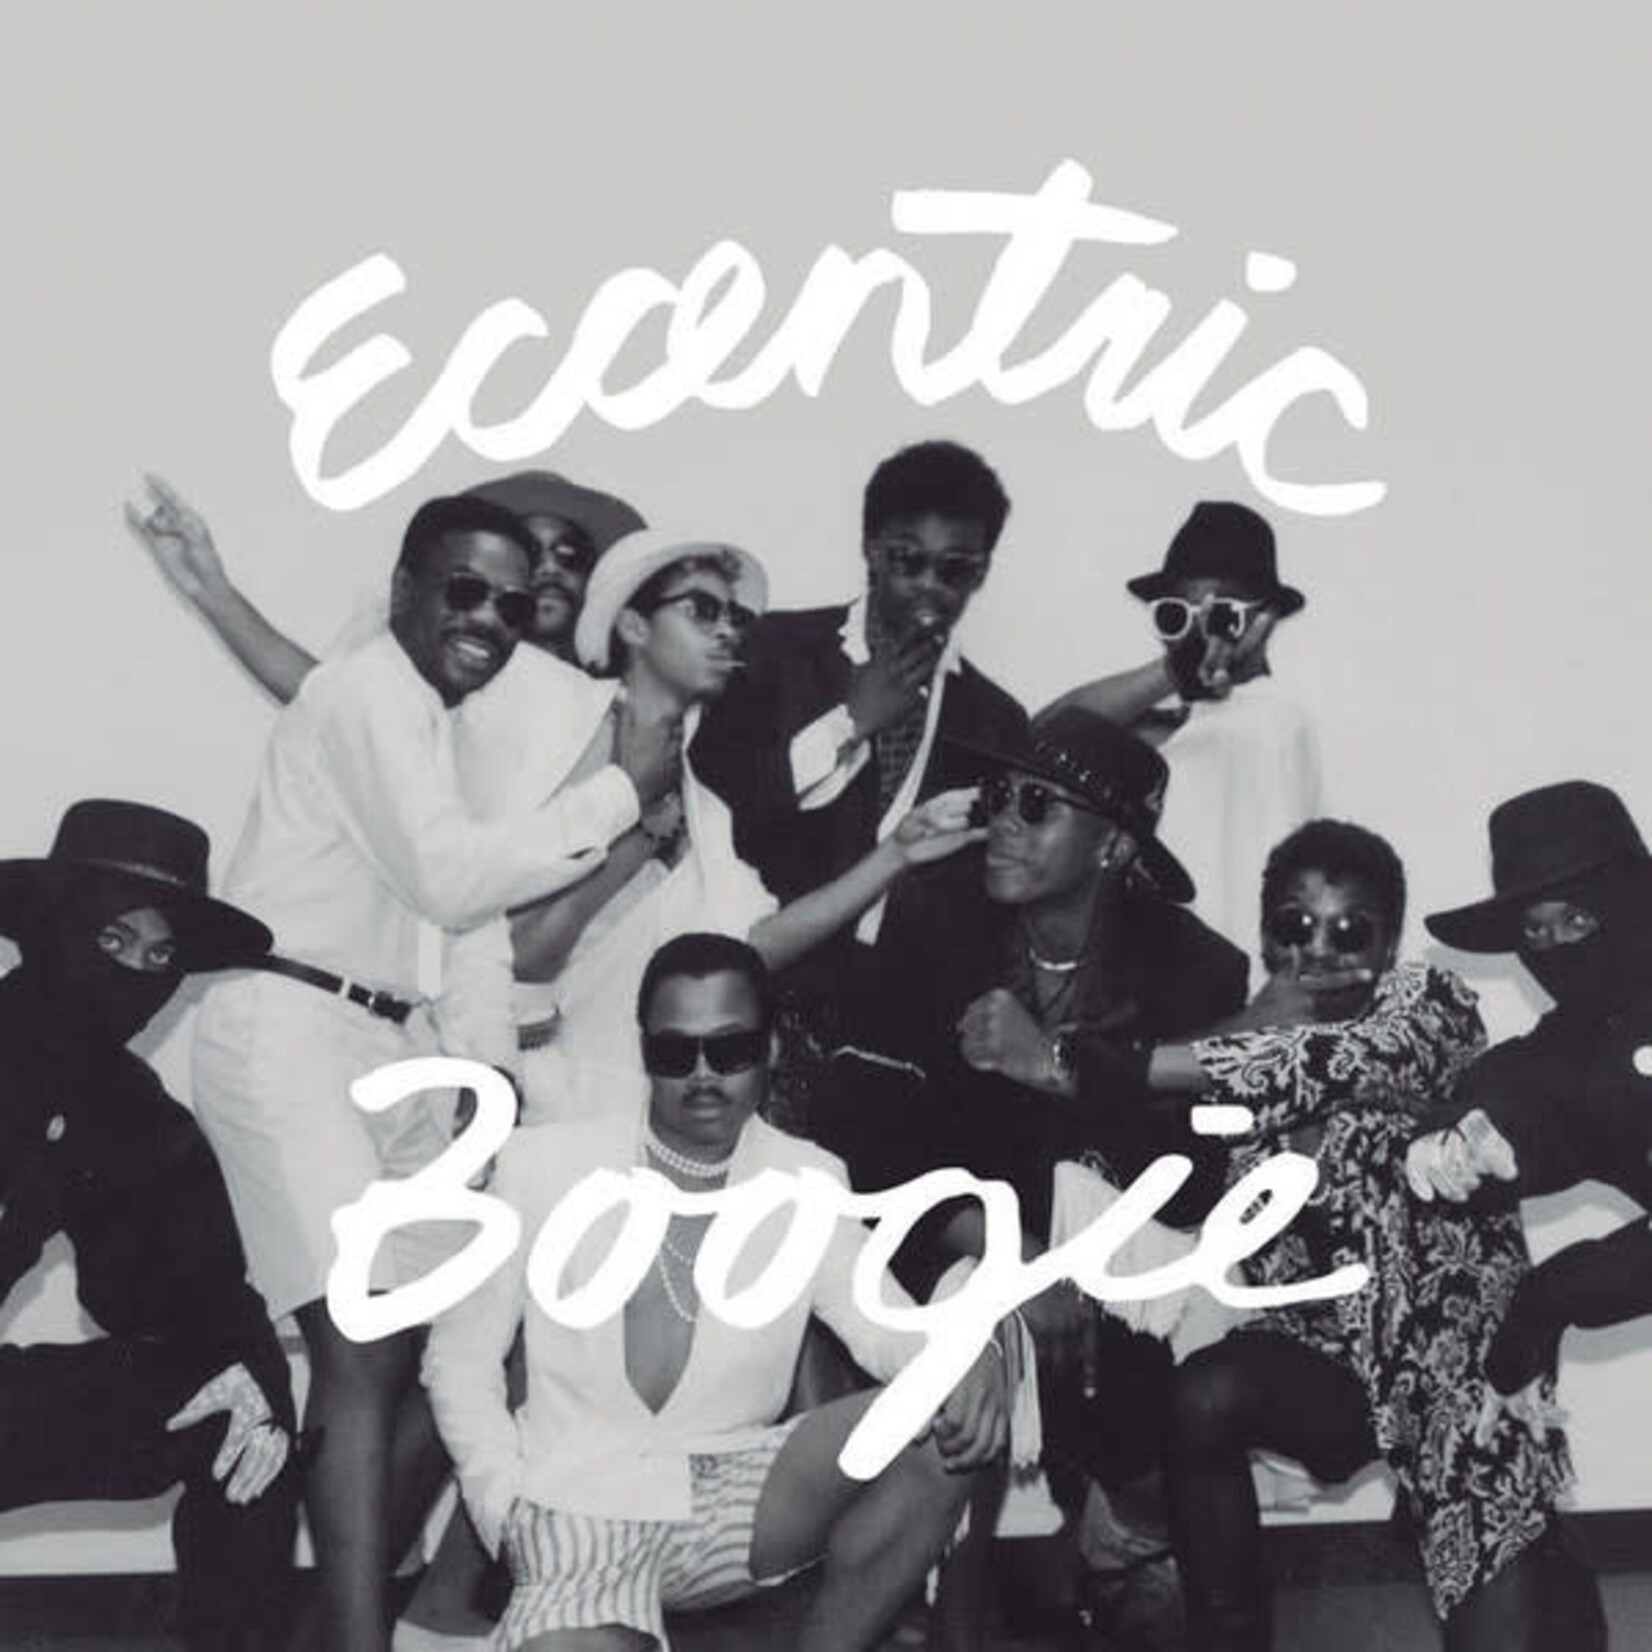 [New] Various Artists - Eccentric Boogie (frosted blue vinyl)